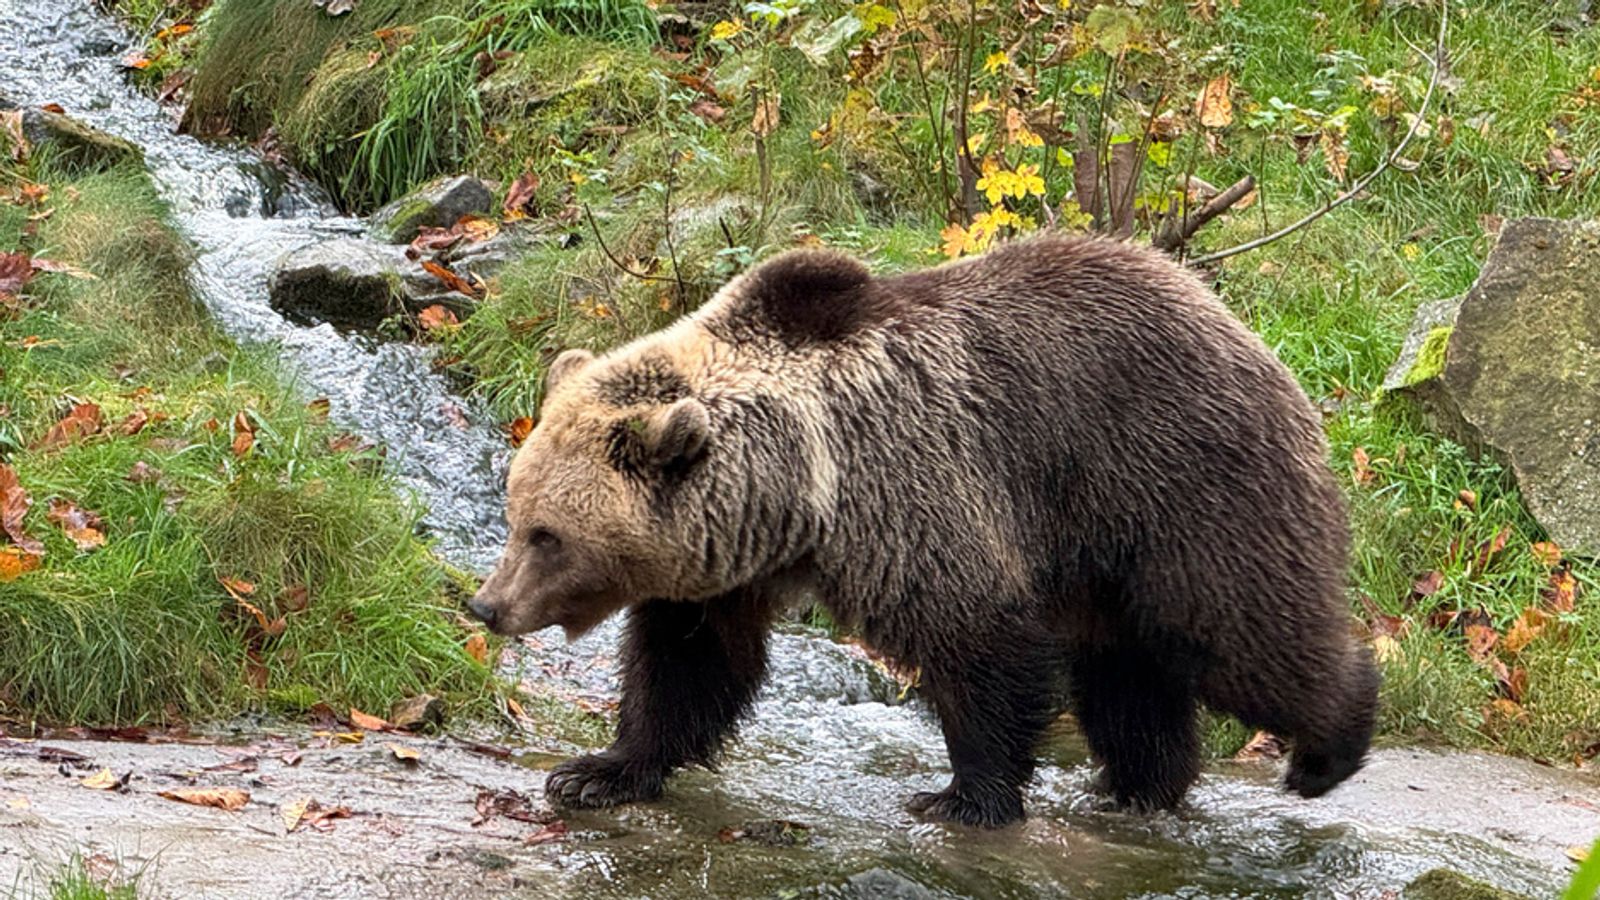 Woman dies after being chased by bear in Slovakia